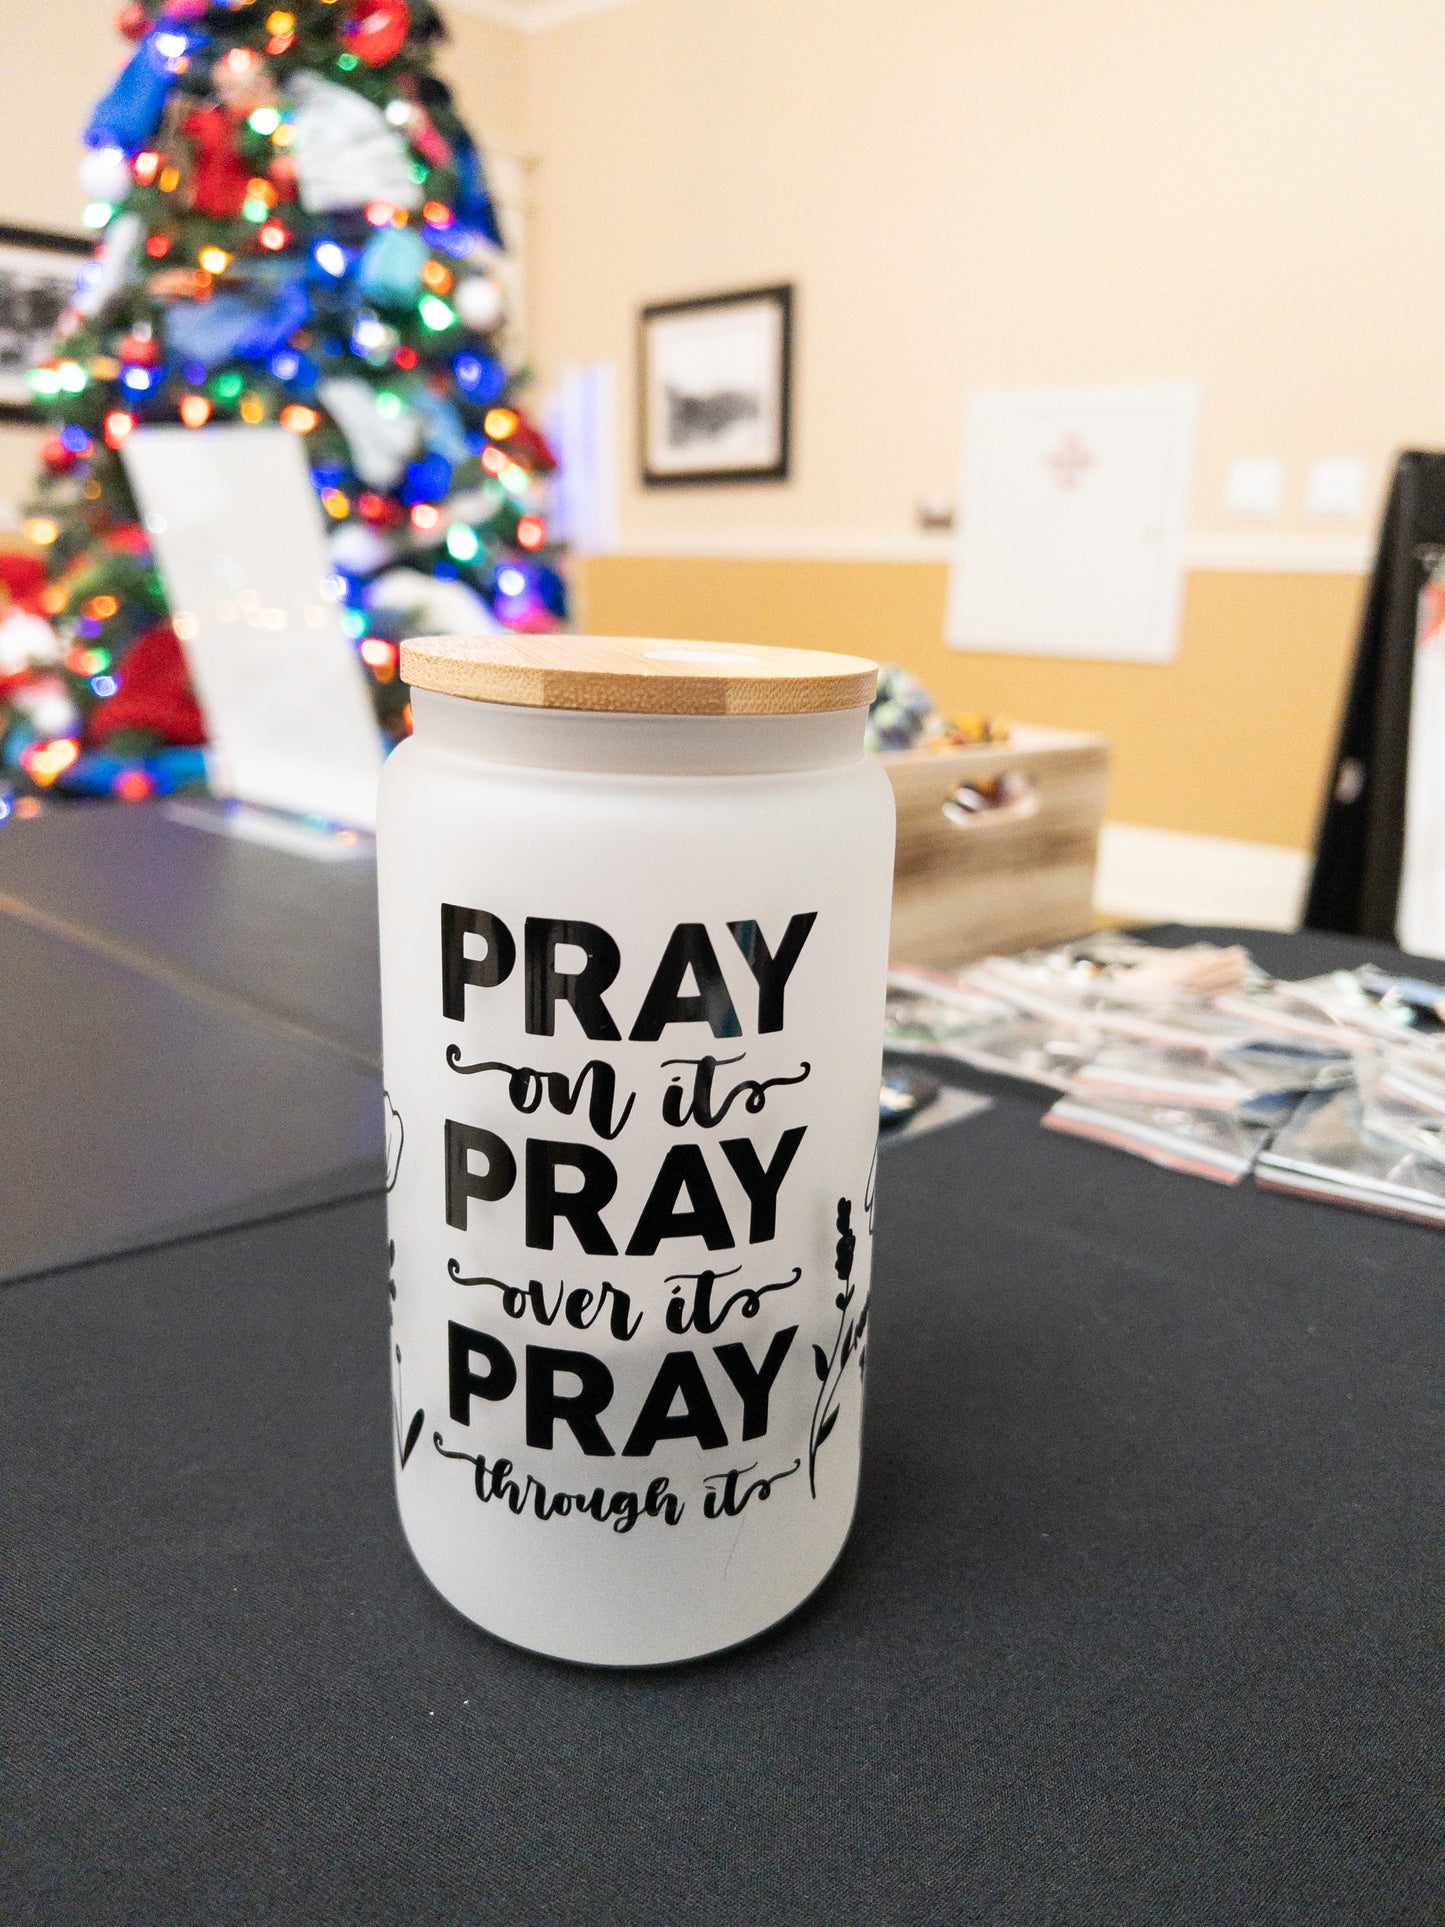 Pray for it - Pray over it - Pray through it Glass Can (HOLOGRAPHIC VINYL)